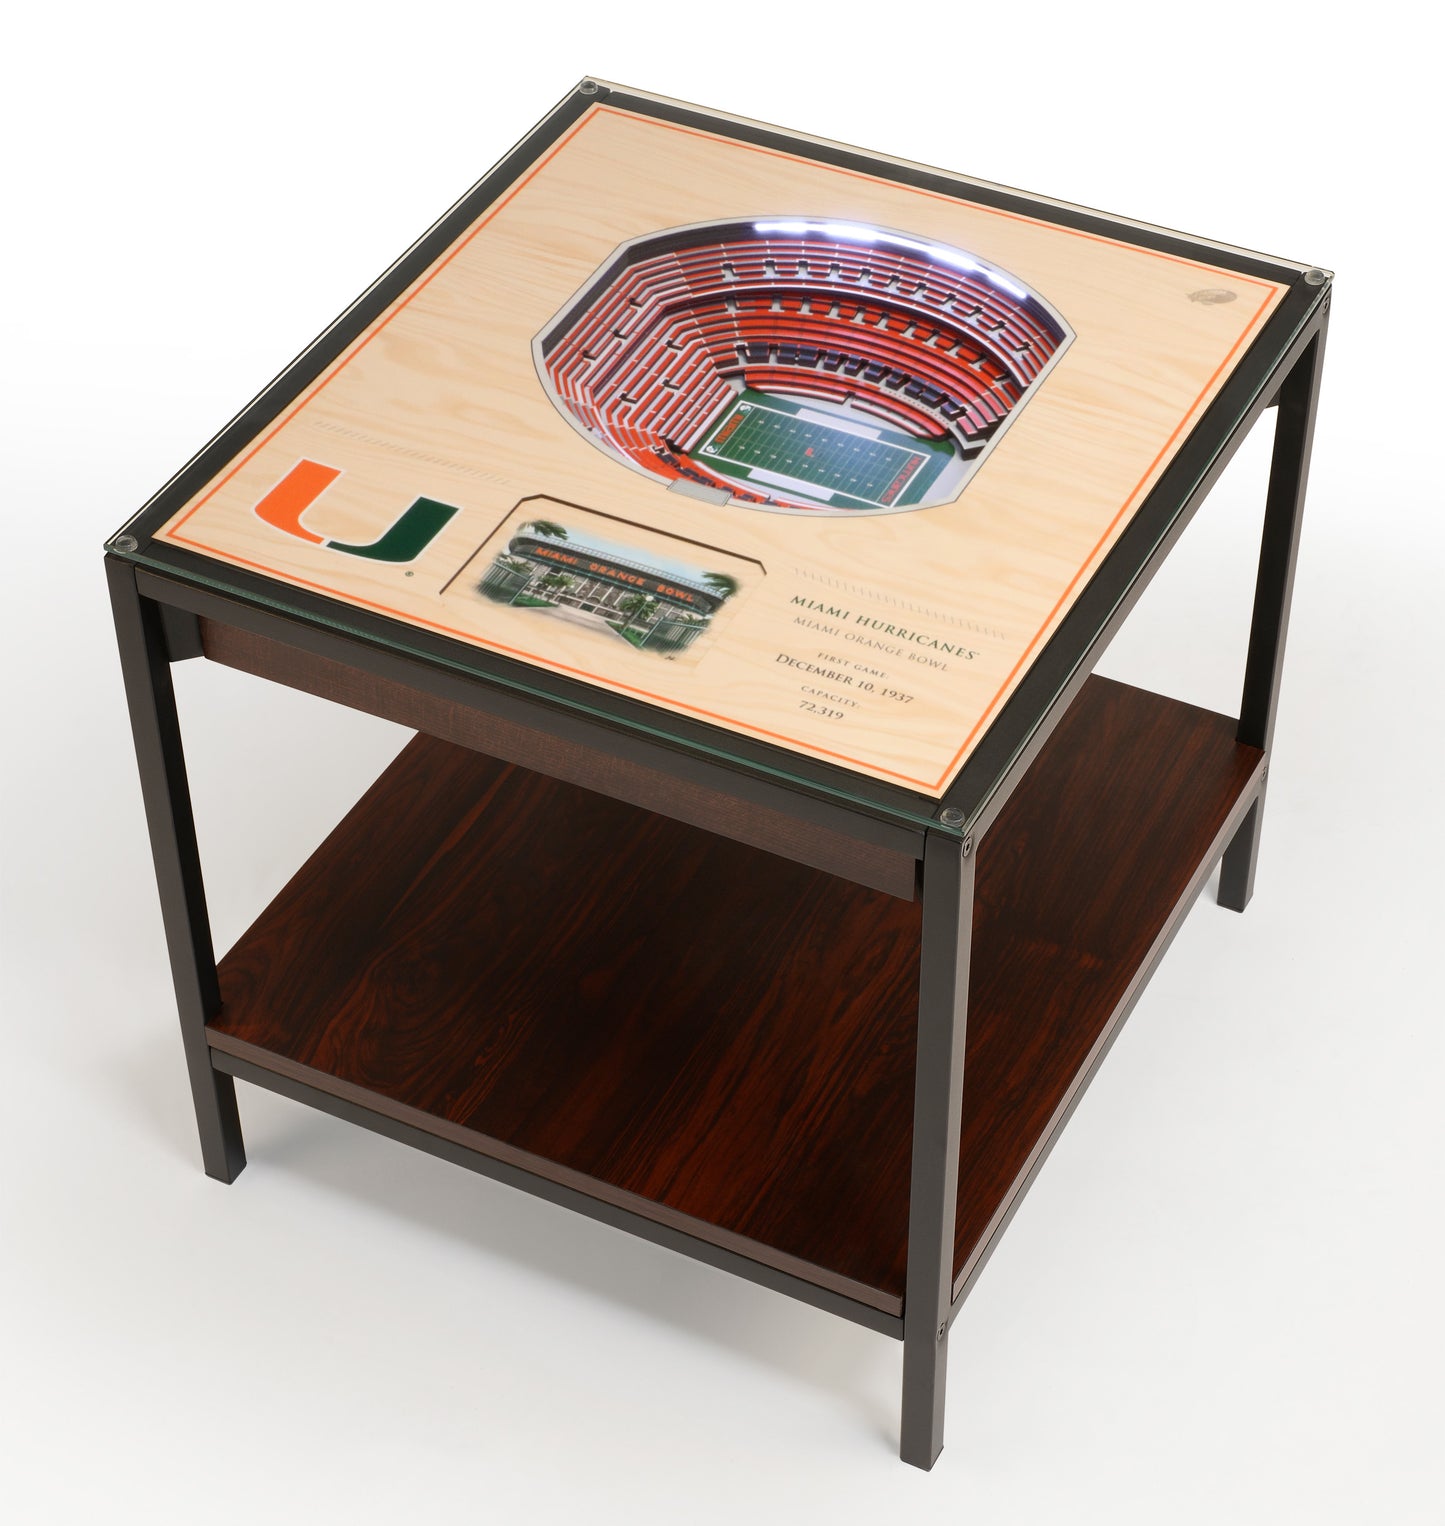 MIAMI HURRICANES 25 LAYER 3D STADIUM LIGHTED END TABLE